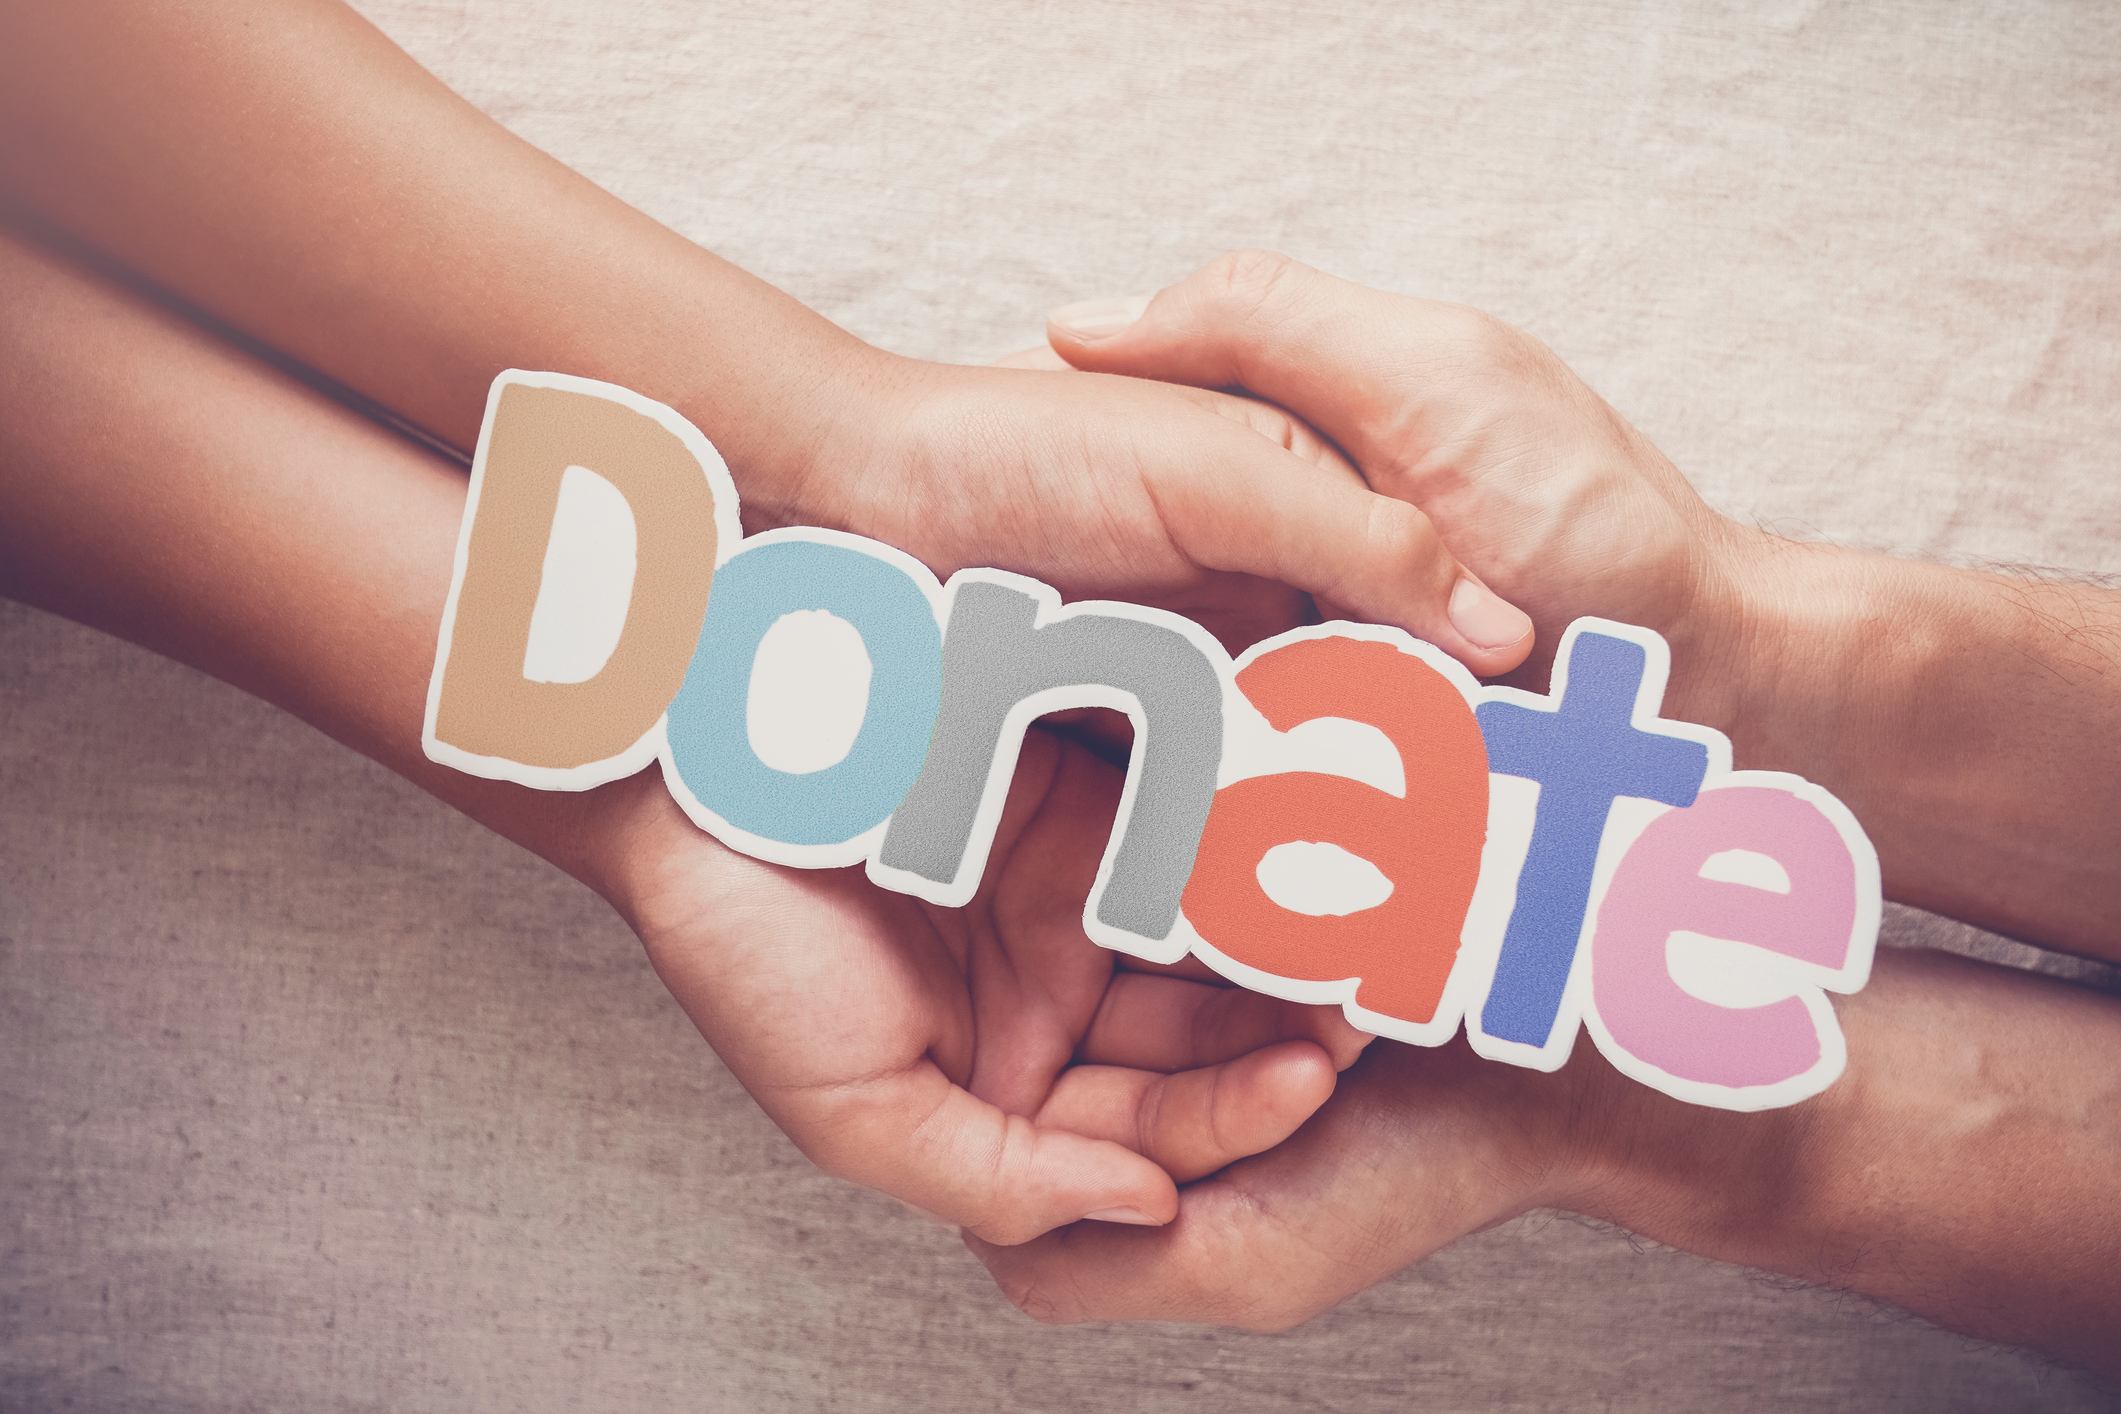 Adult and child hands holding word DONATE, donation and charity concept